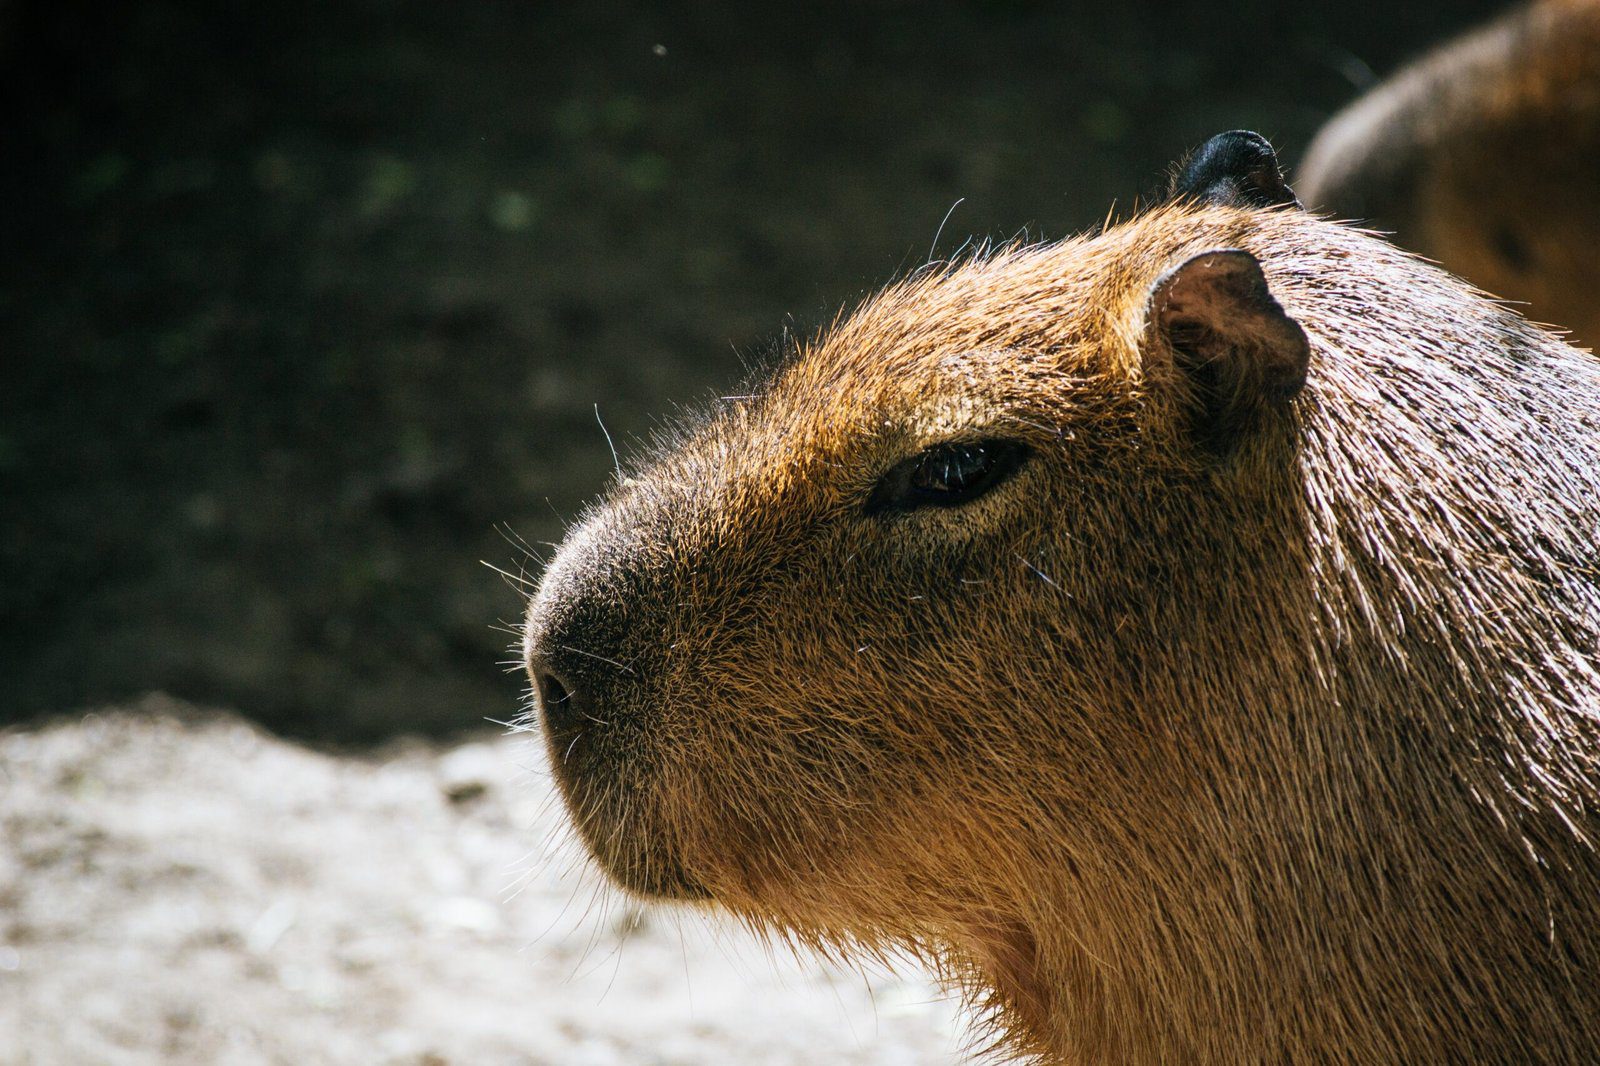 Exploring the Cotswold Wildlife Park with Capybaras